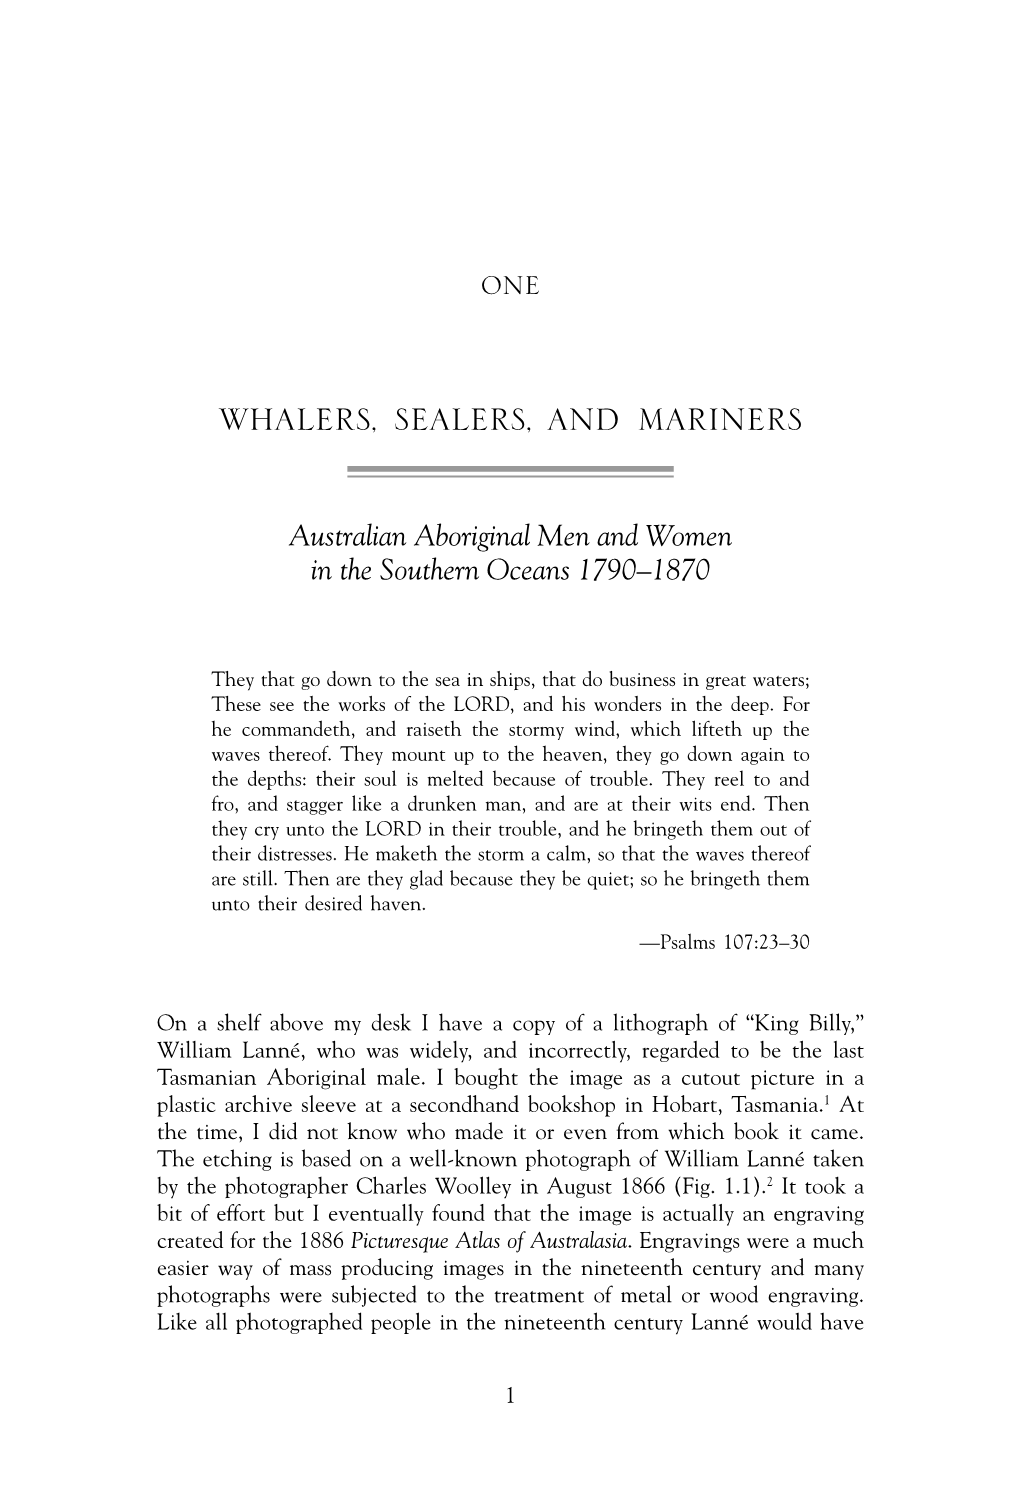 Whalers, Sealers, and Mariners